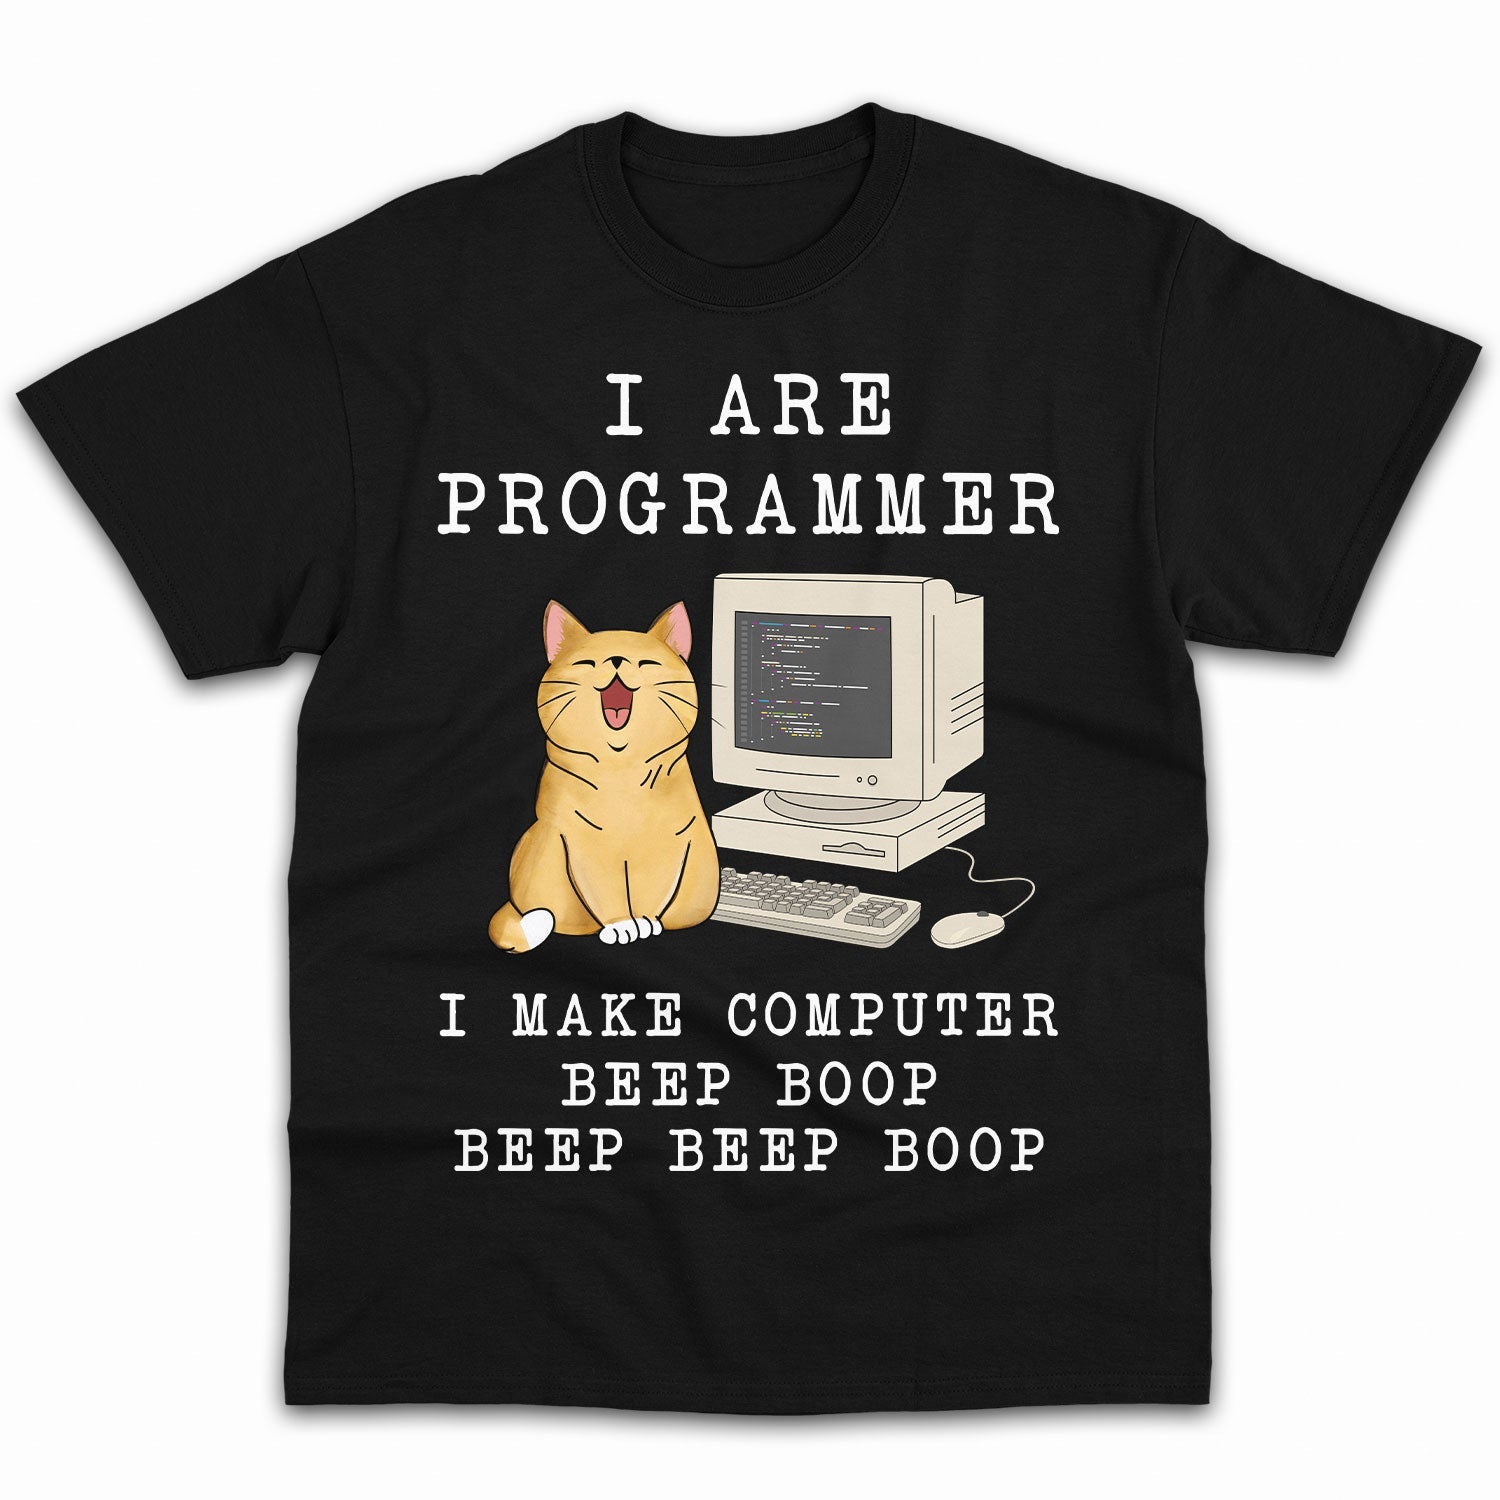 21 Best Gifts For The Programmer Boyfriend in Your Life! | Gifts for  programmers, Software engineer gifts, Birthday gifts for best friend